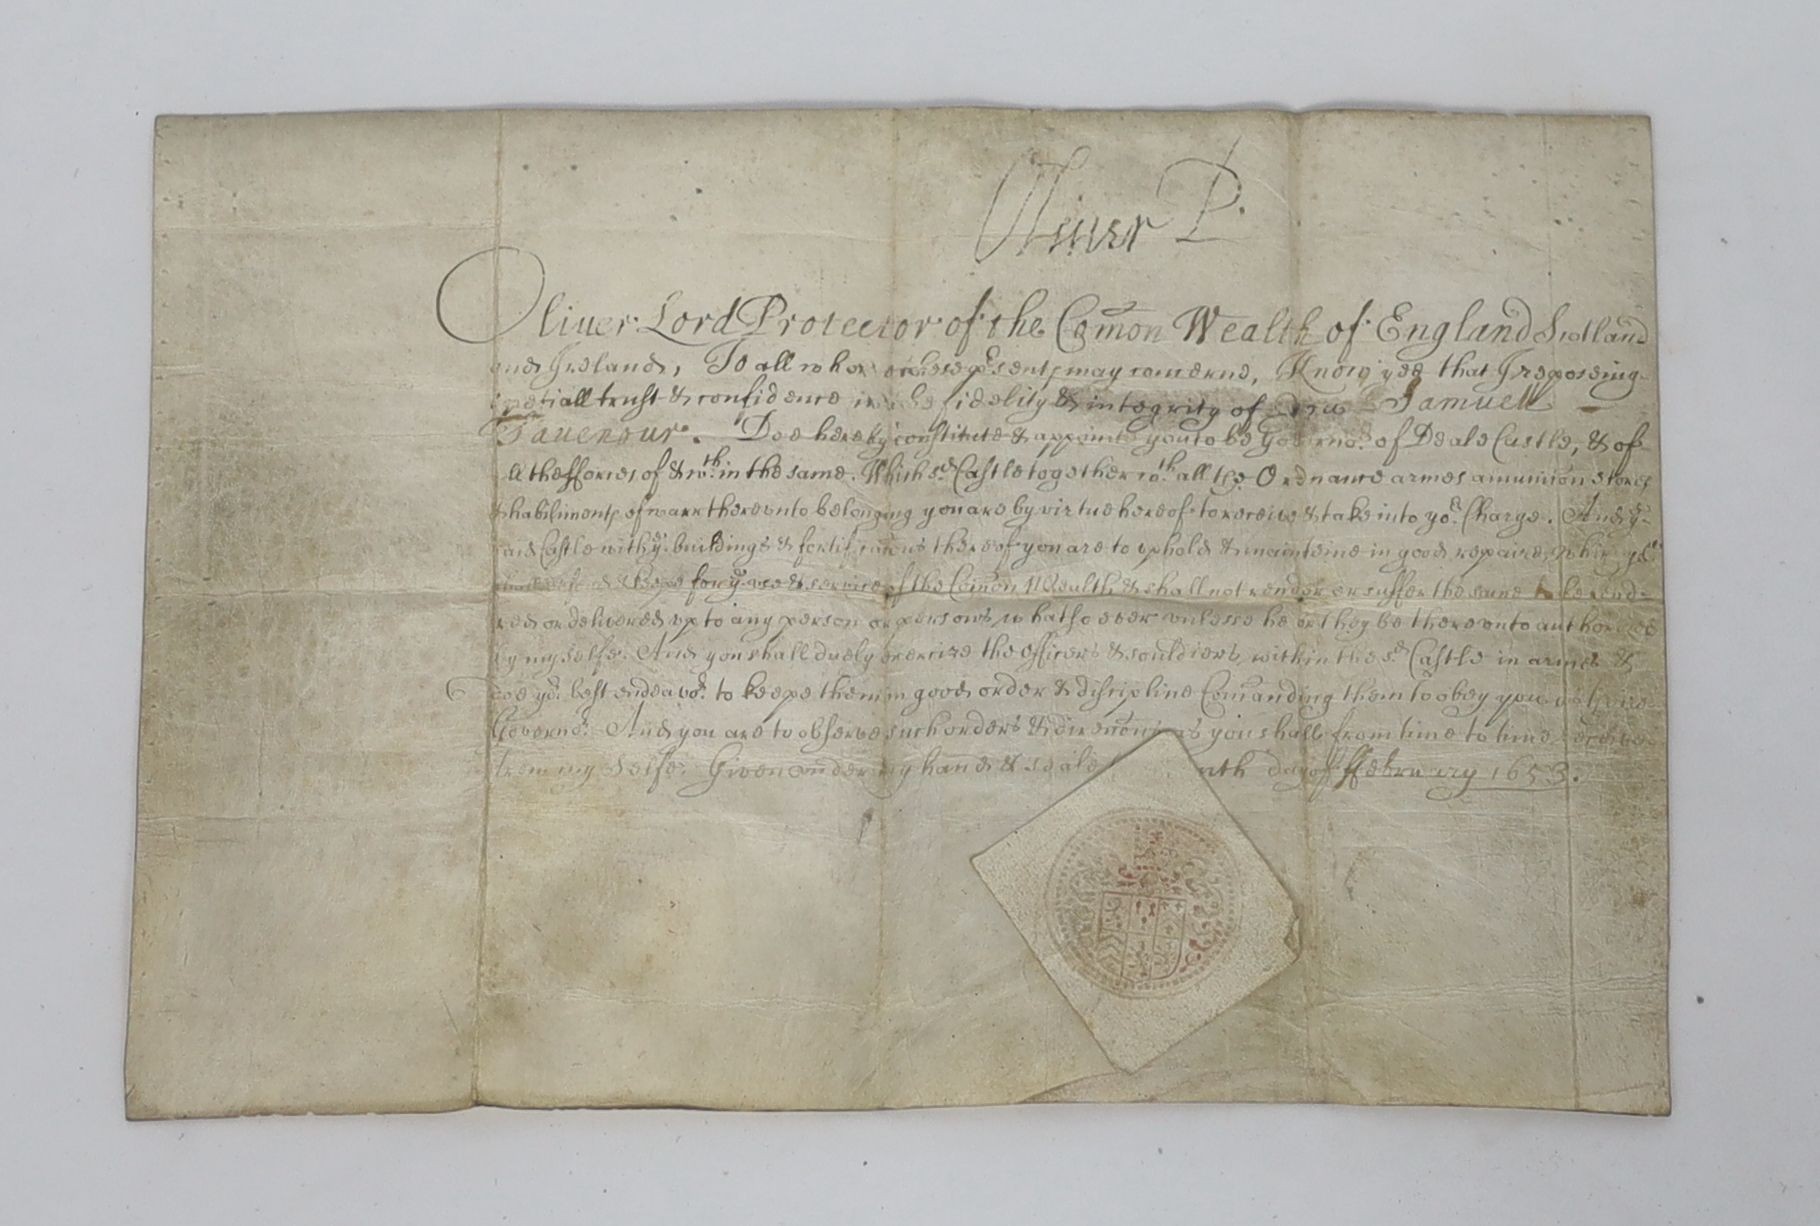 From the Dering Surrenden collection - A commission appointing Samuel Tavenour as governor of Deal Castle, 1654, bears the sign manual of Oliver Cromwell as Lord Protector – Oliver P. Commission of Samuel Tavenour as gov